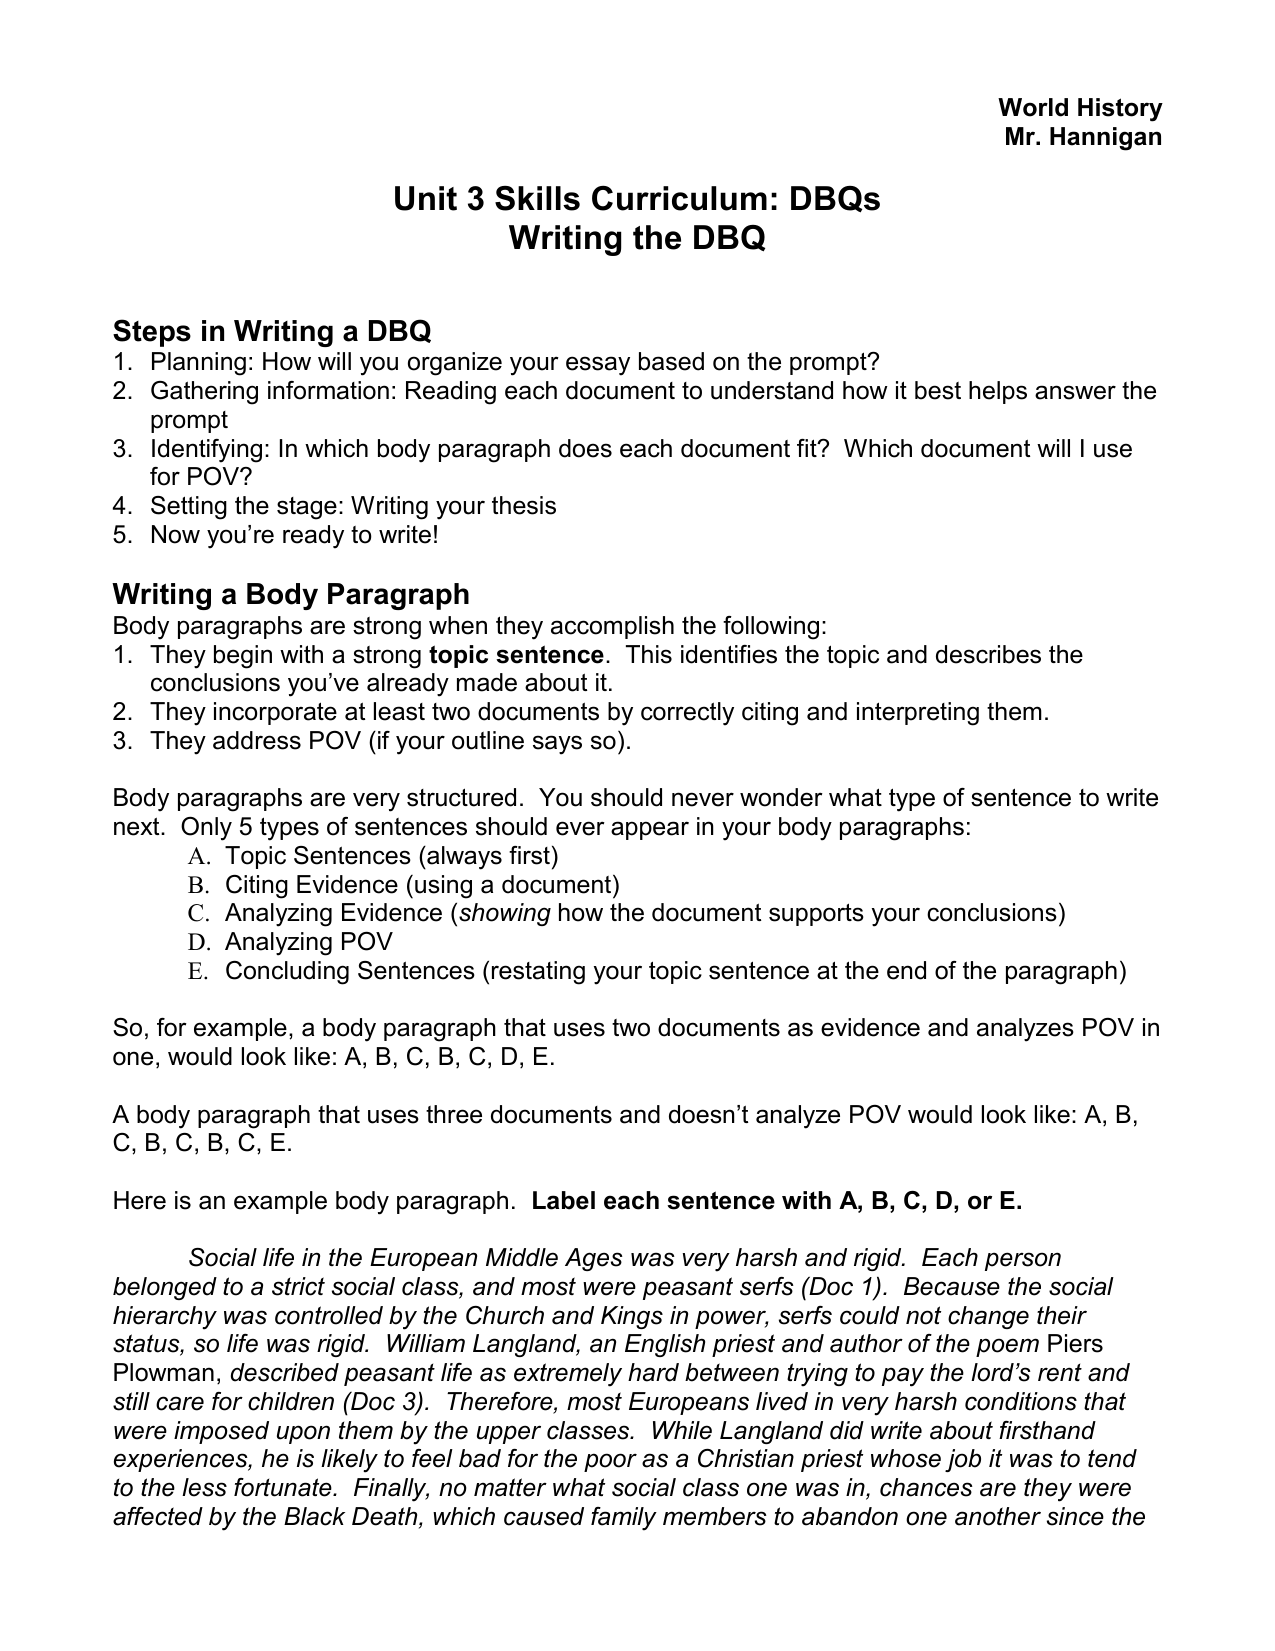 how to cite evidence in dbq essay